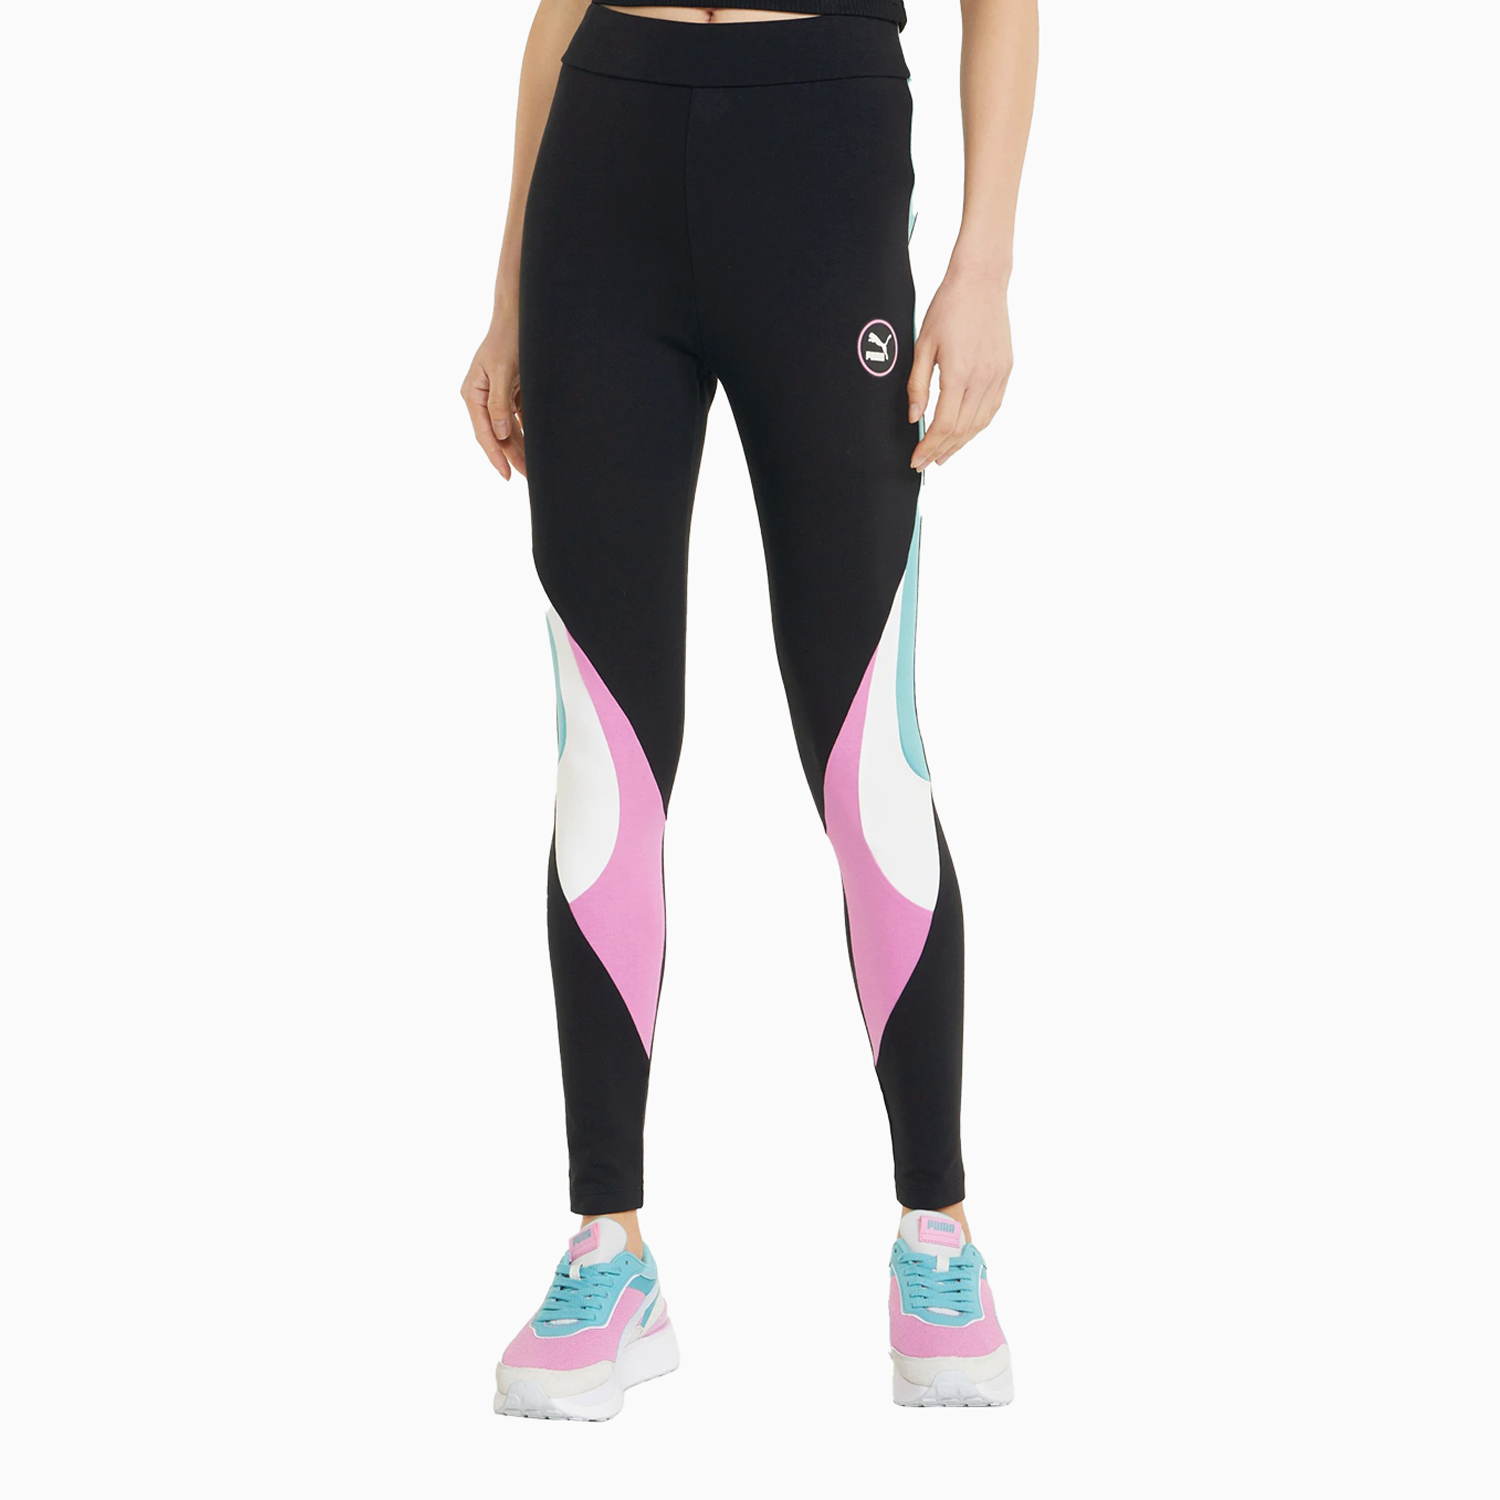 Puma Women's Sportswear Graphic Outfit - Color: Puma Black - Tops and Bottoms USA -